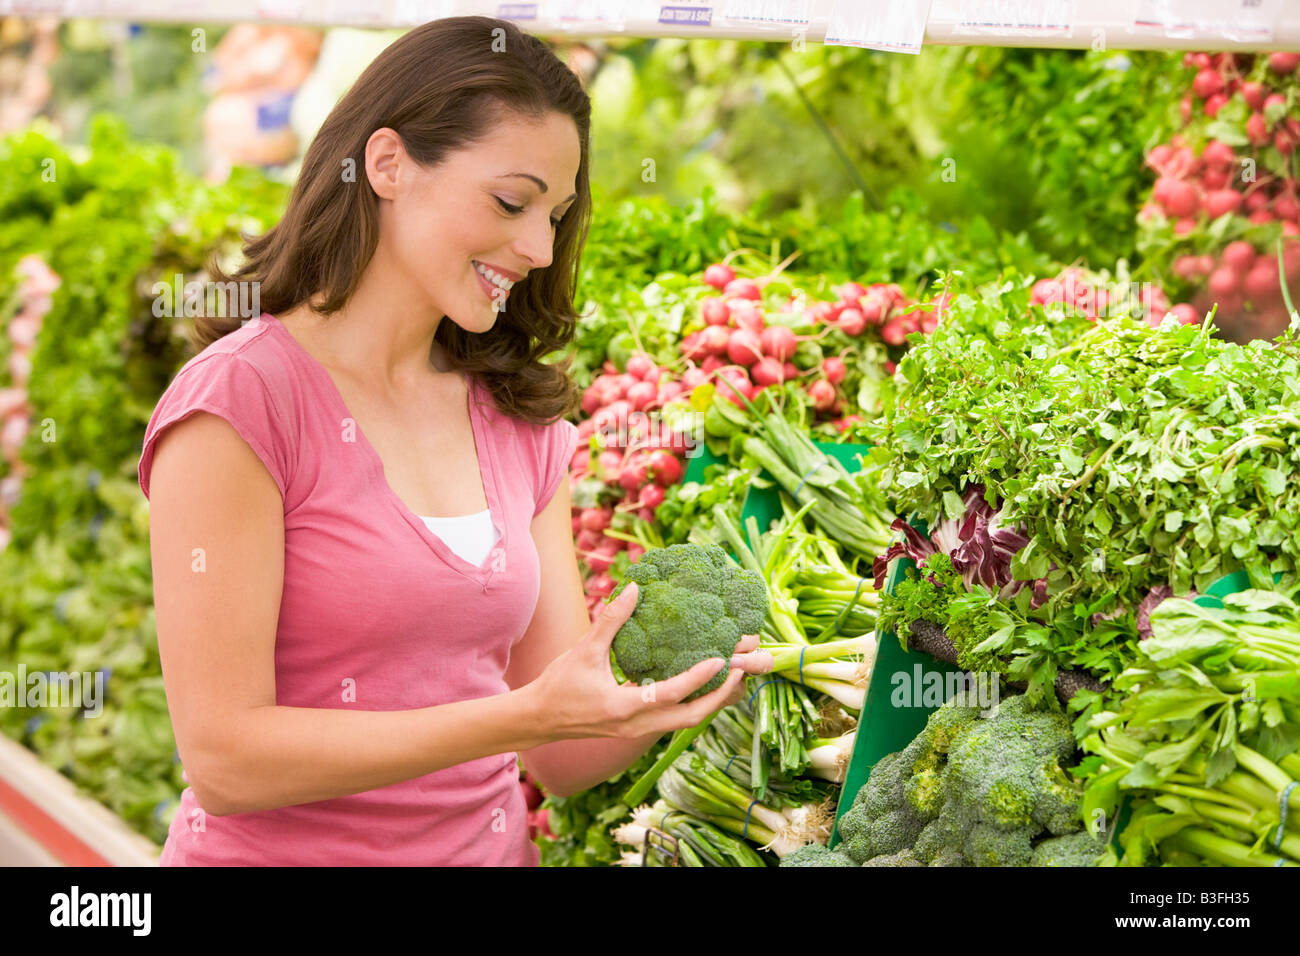 Woman shopping for broccoli at a grocery store Stock Photo